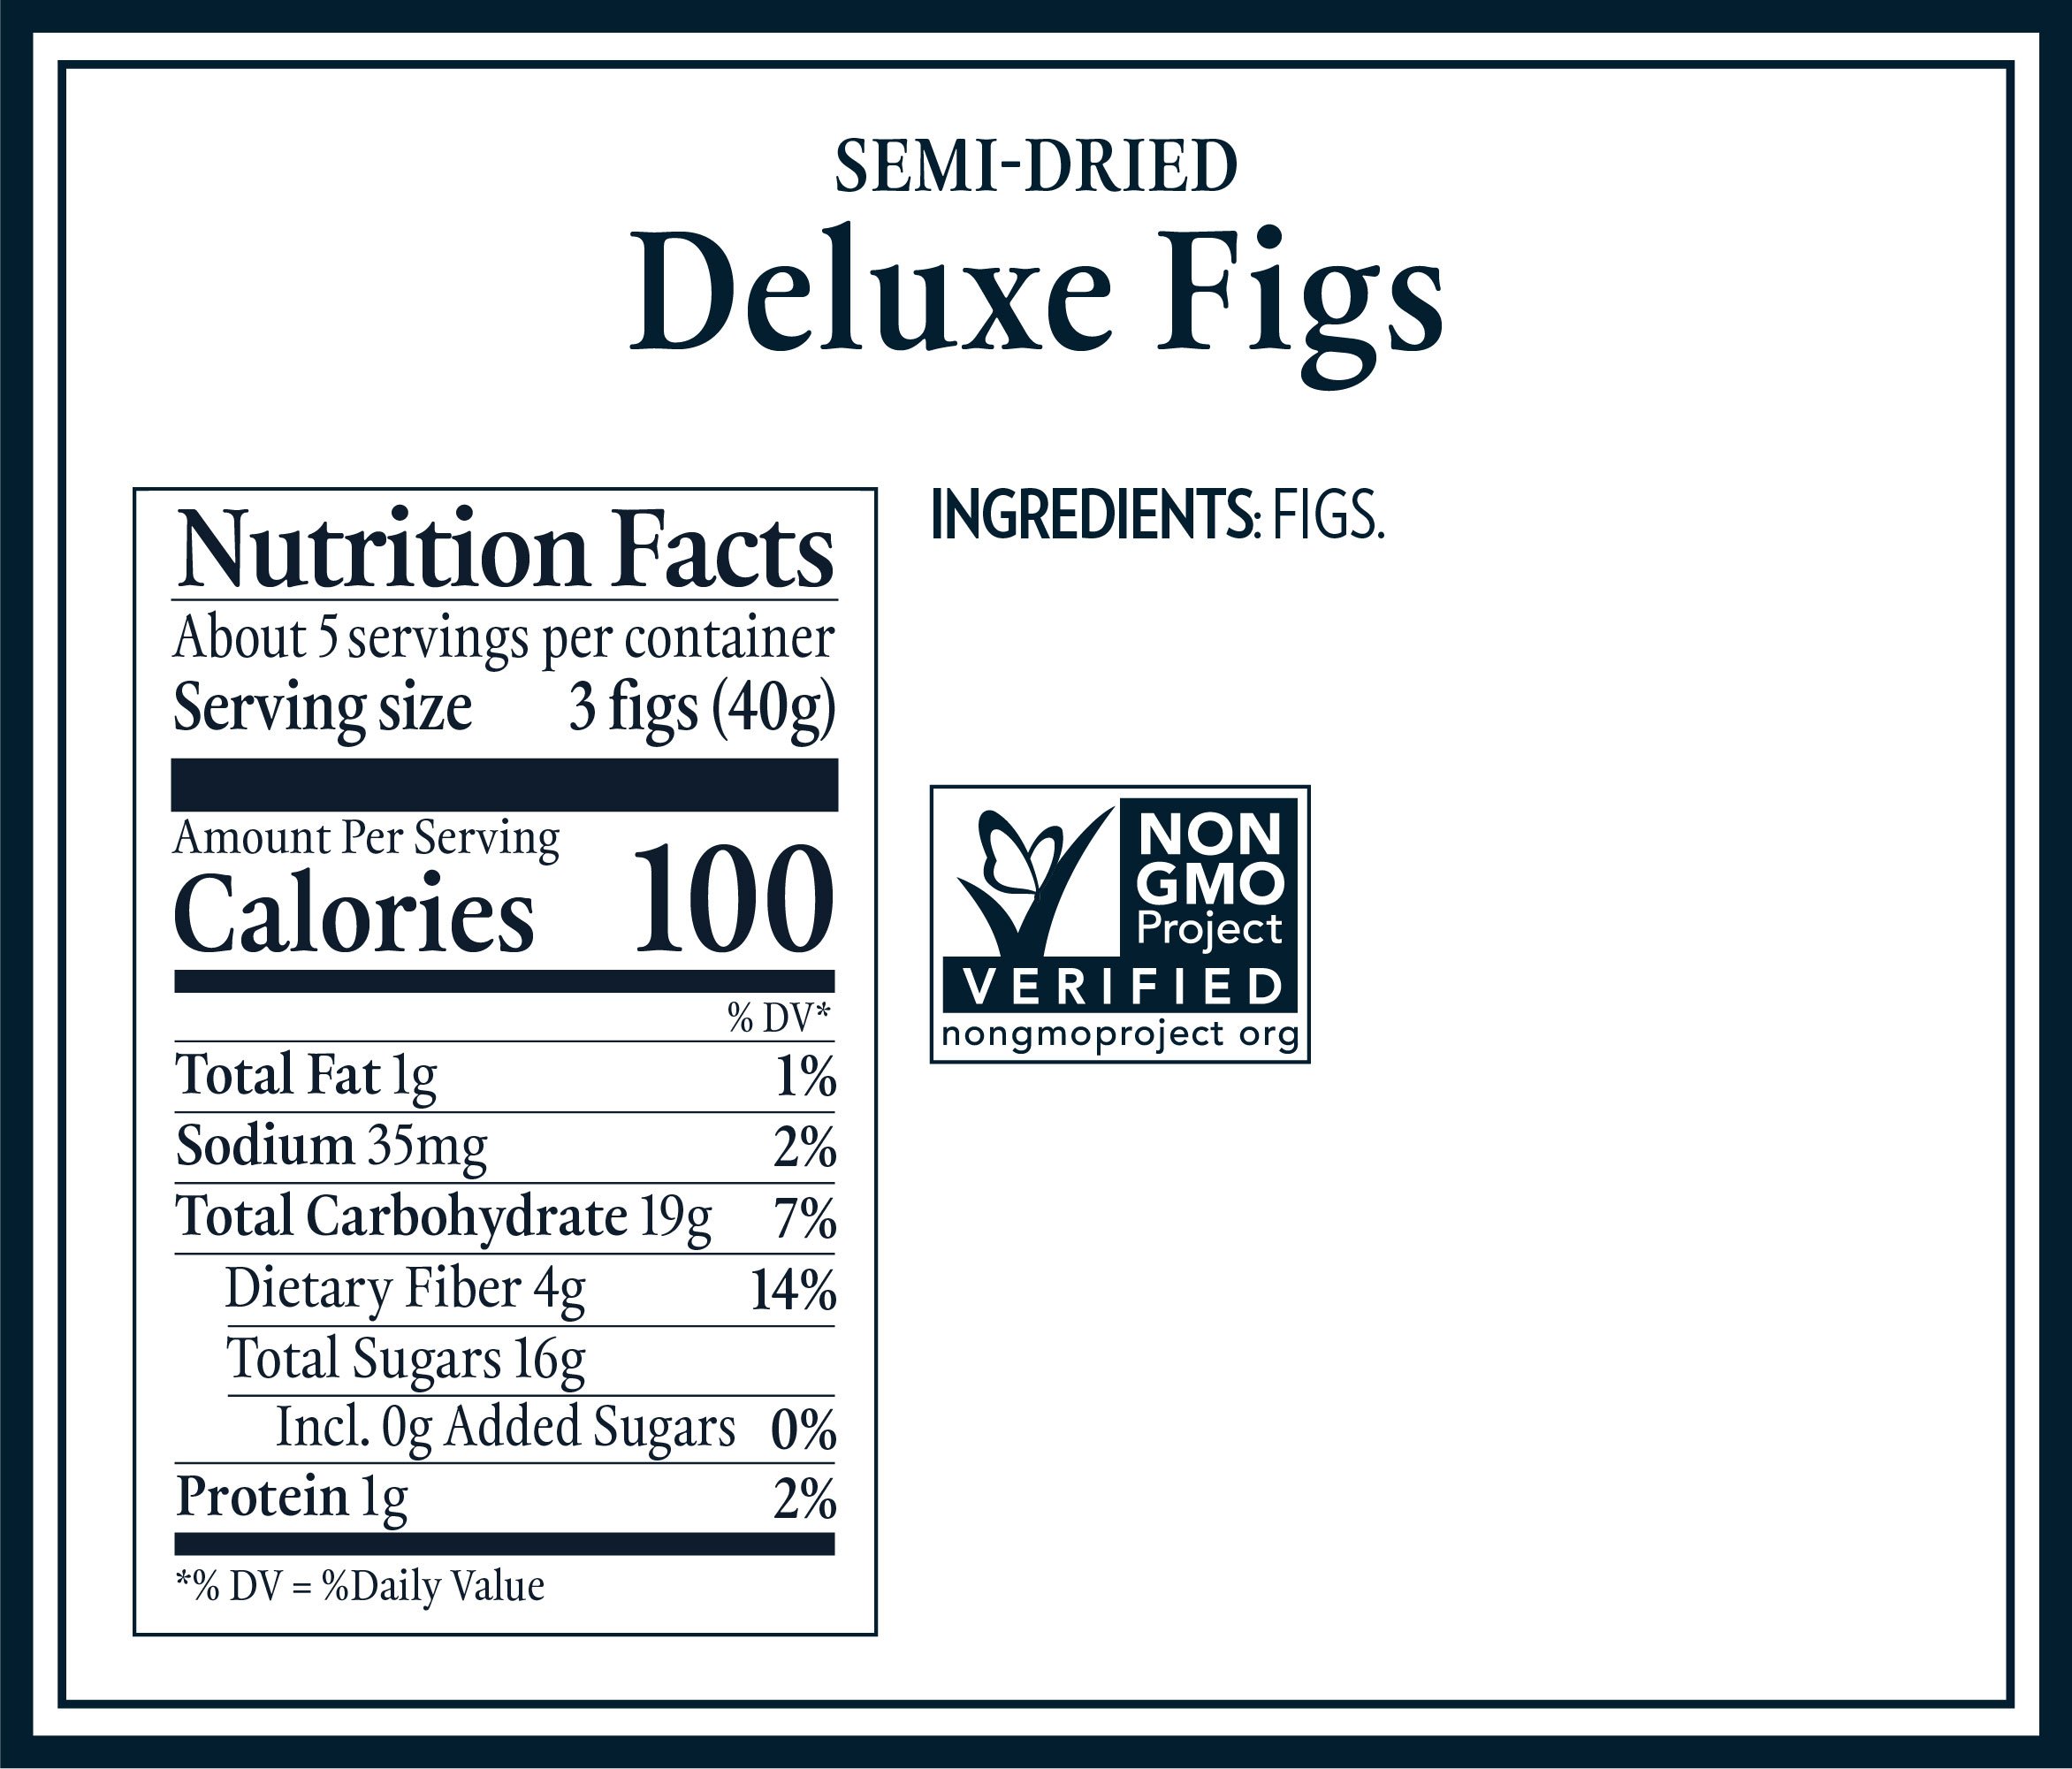 Nutrition Tables_semi-dried fruit_deluxe fig